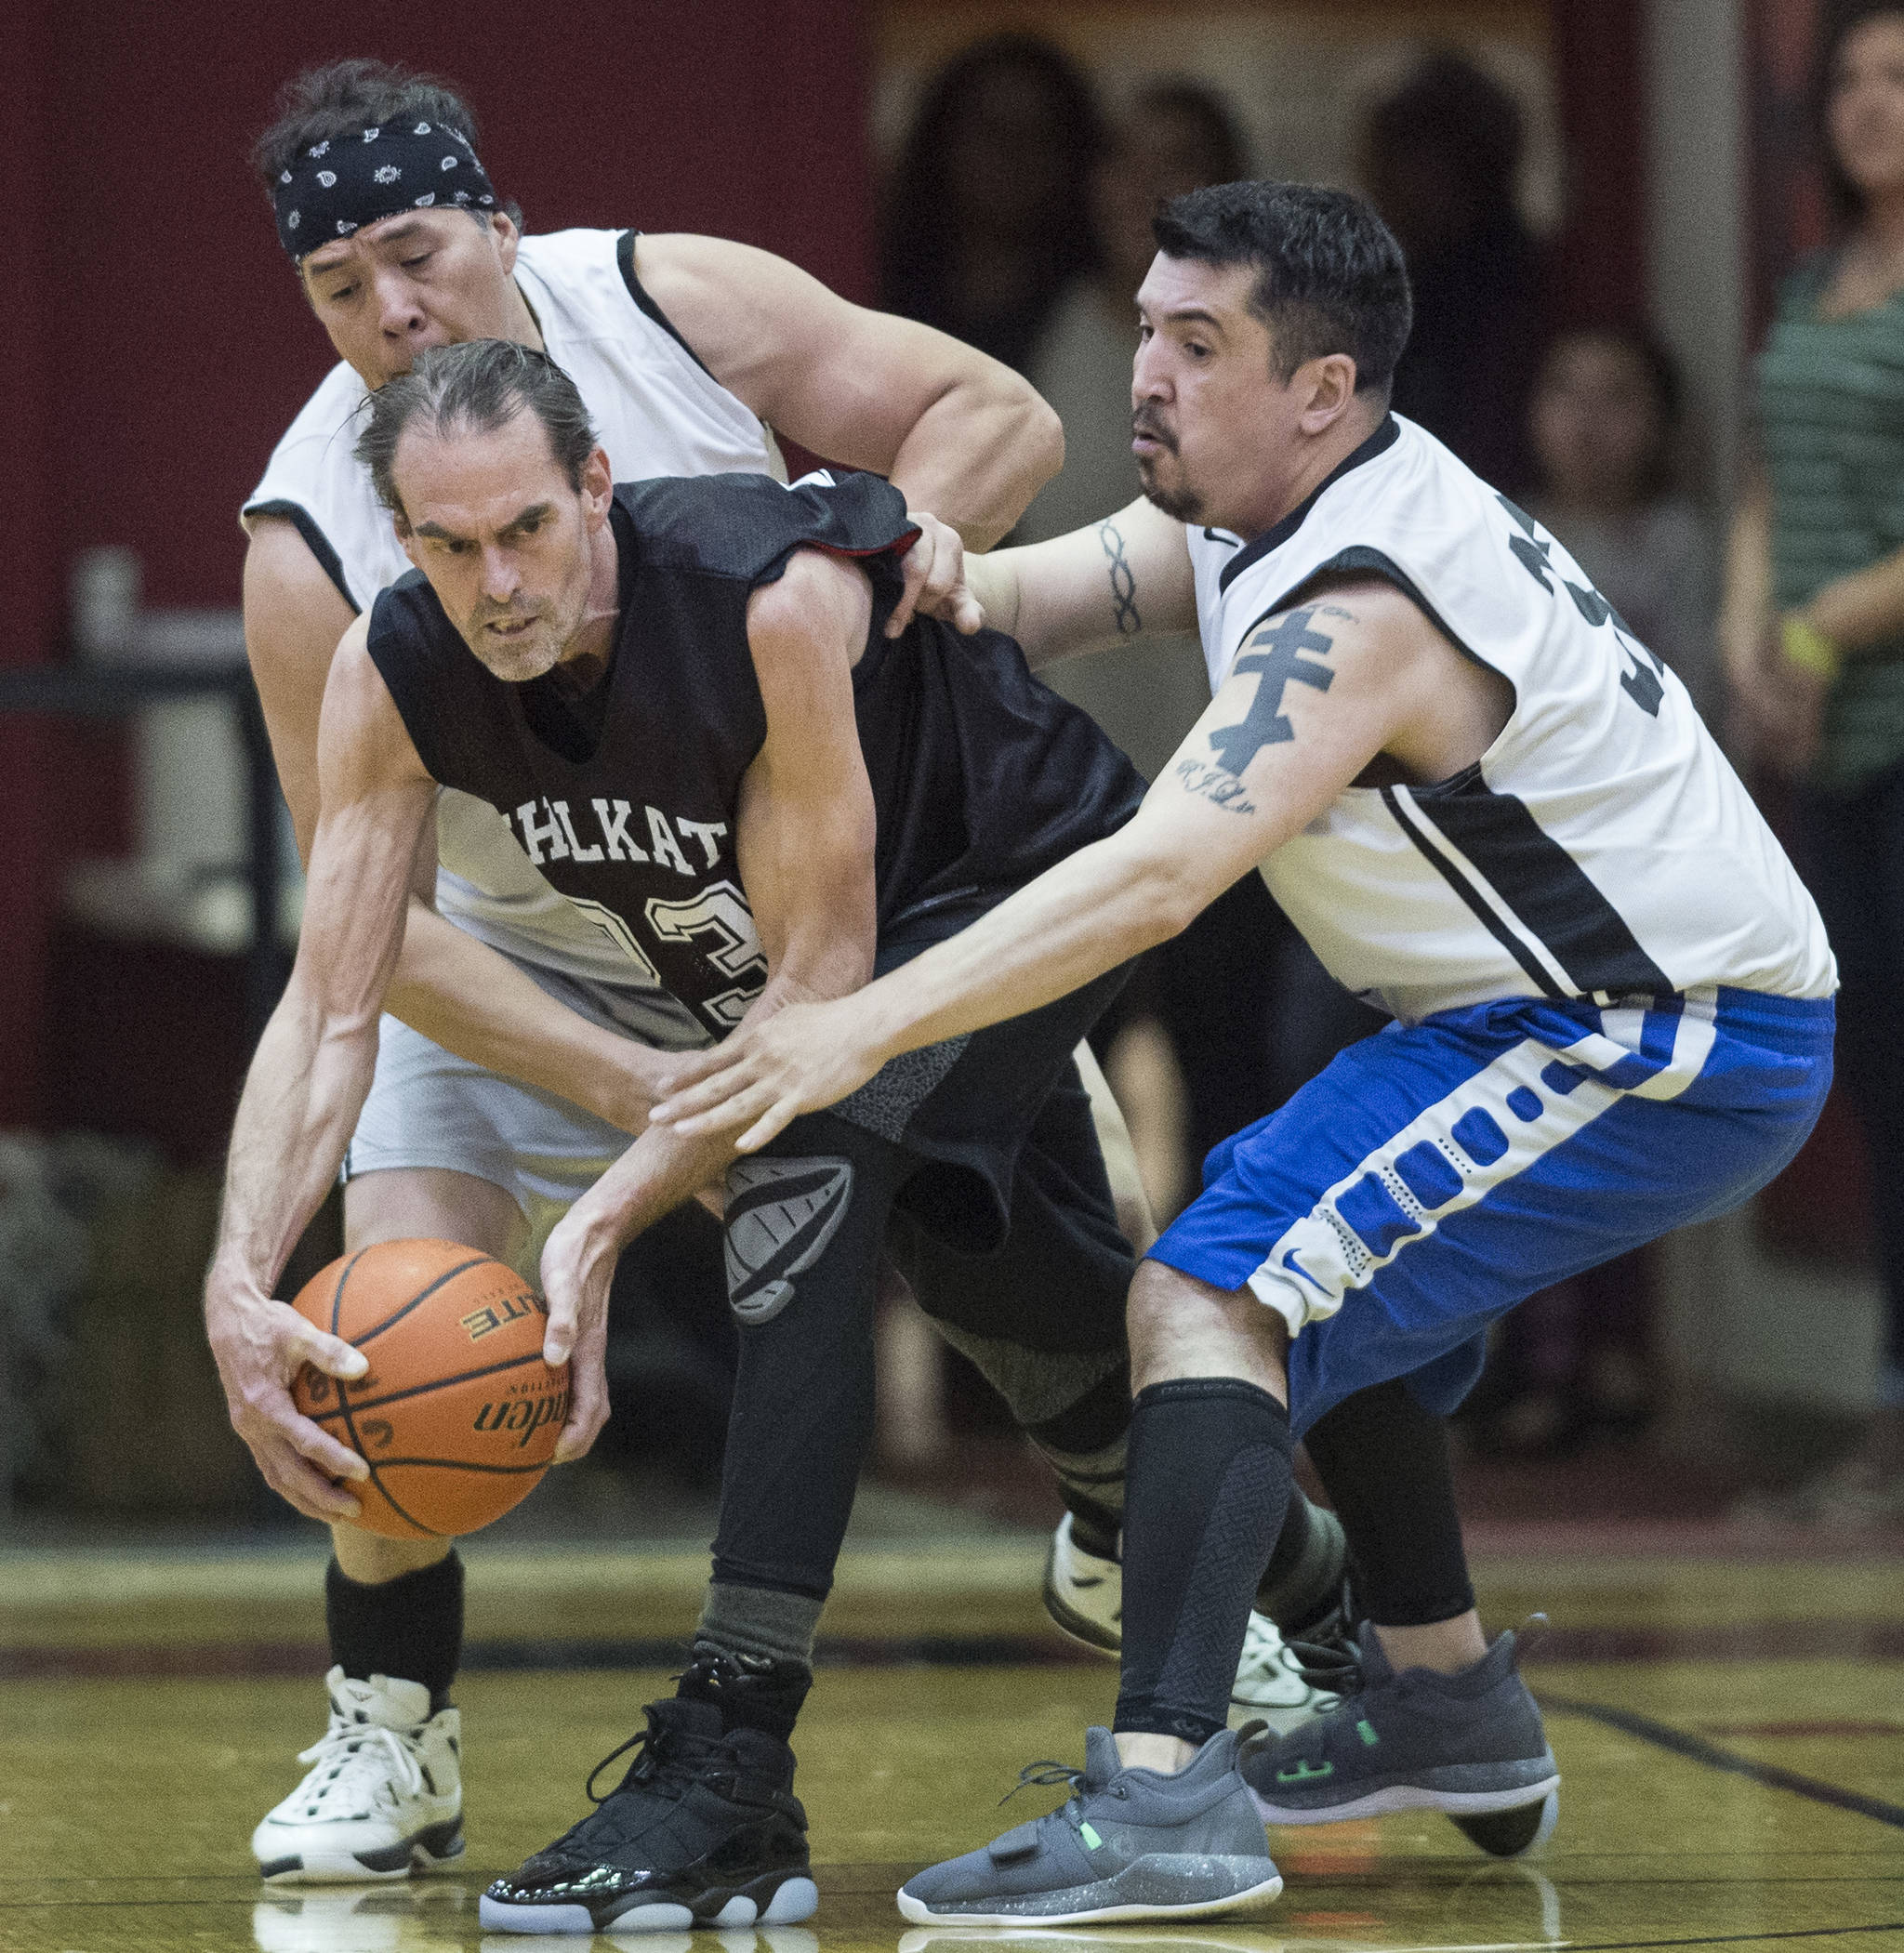 Klukwan’s Mike Bott, center, is pressured by Yakutat’s Sam Demmert, left, and Bob Lekanof during their Masters bracket game at the Juneau Lions Club 73rd Annual Gold Medal Basketball Tournament at Juneau-Douglas High School on Friday, March 22, 2019. Klukwan won 63-58. (Michael Penn | Juneau Empire)